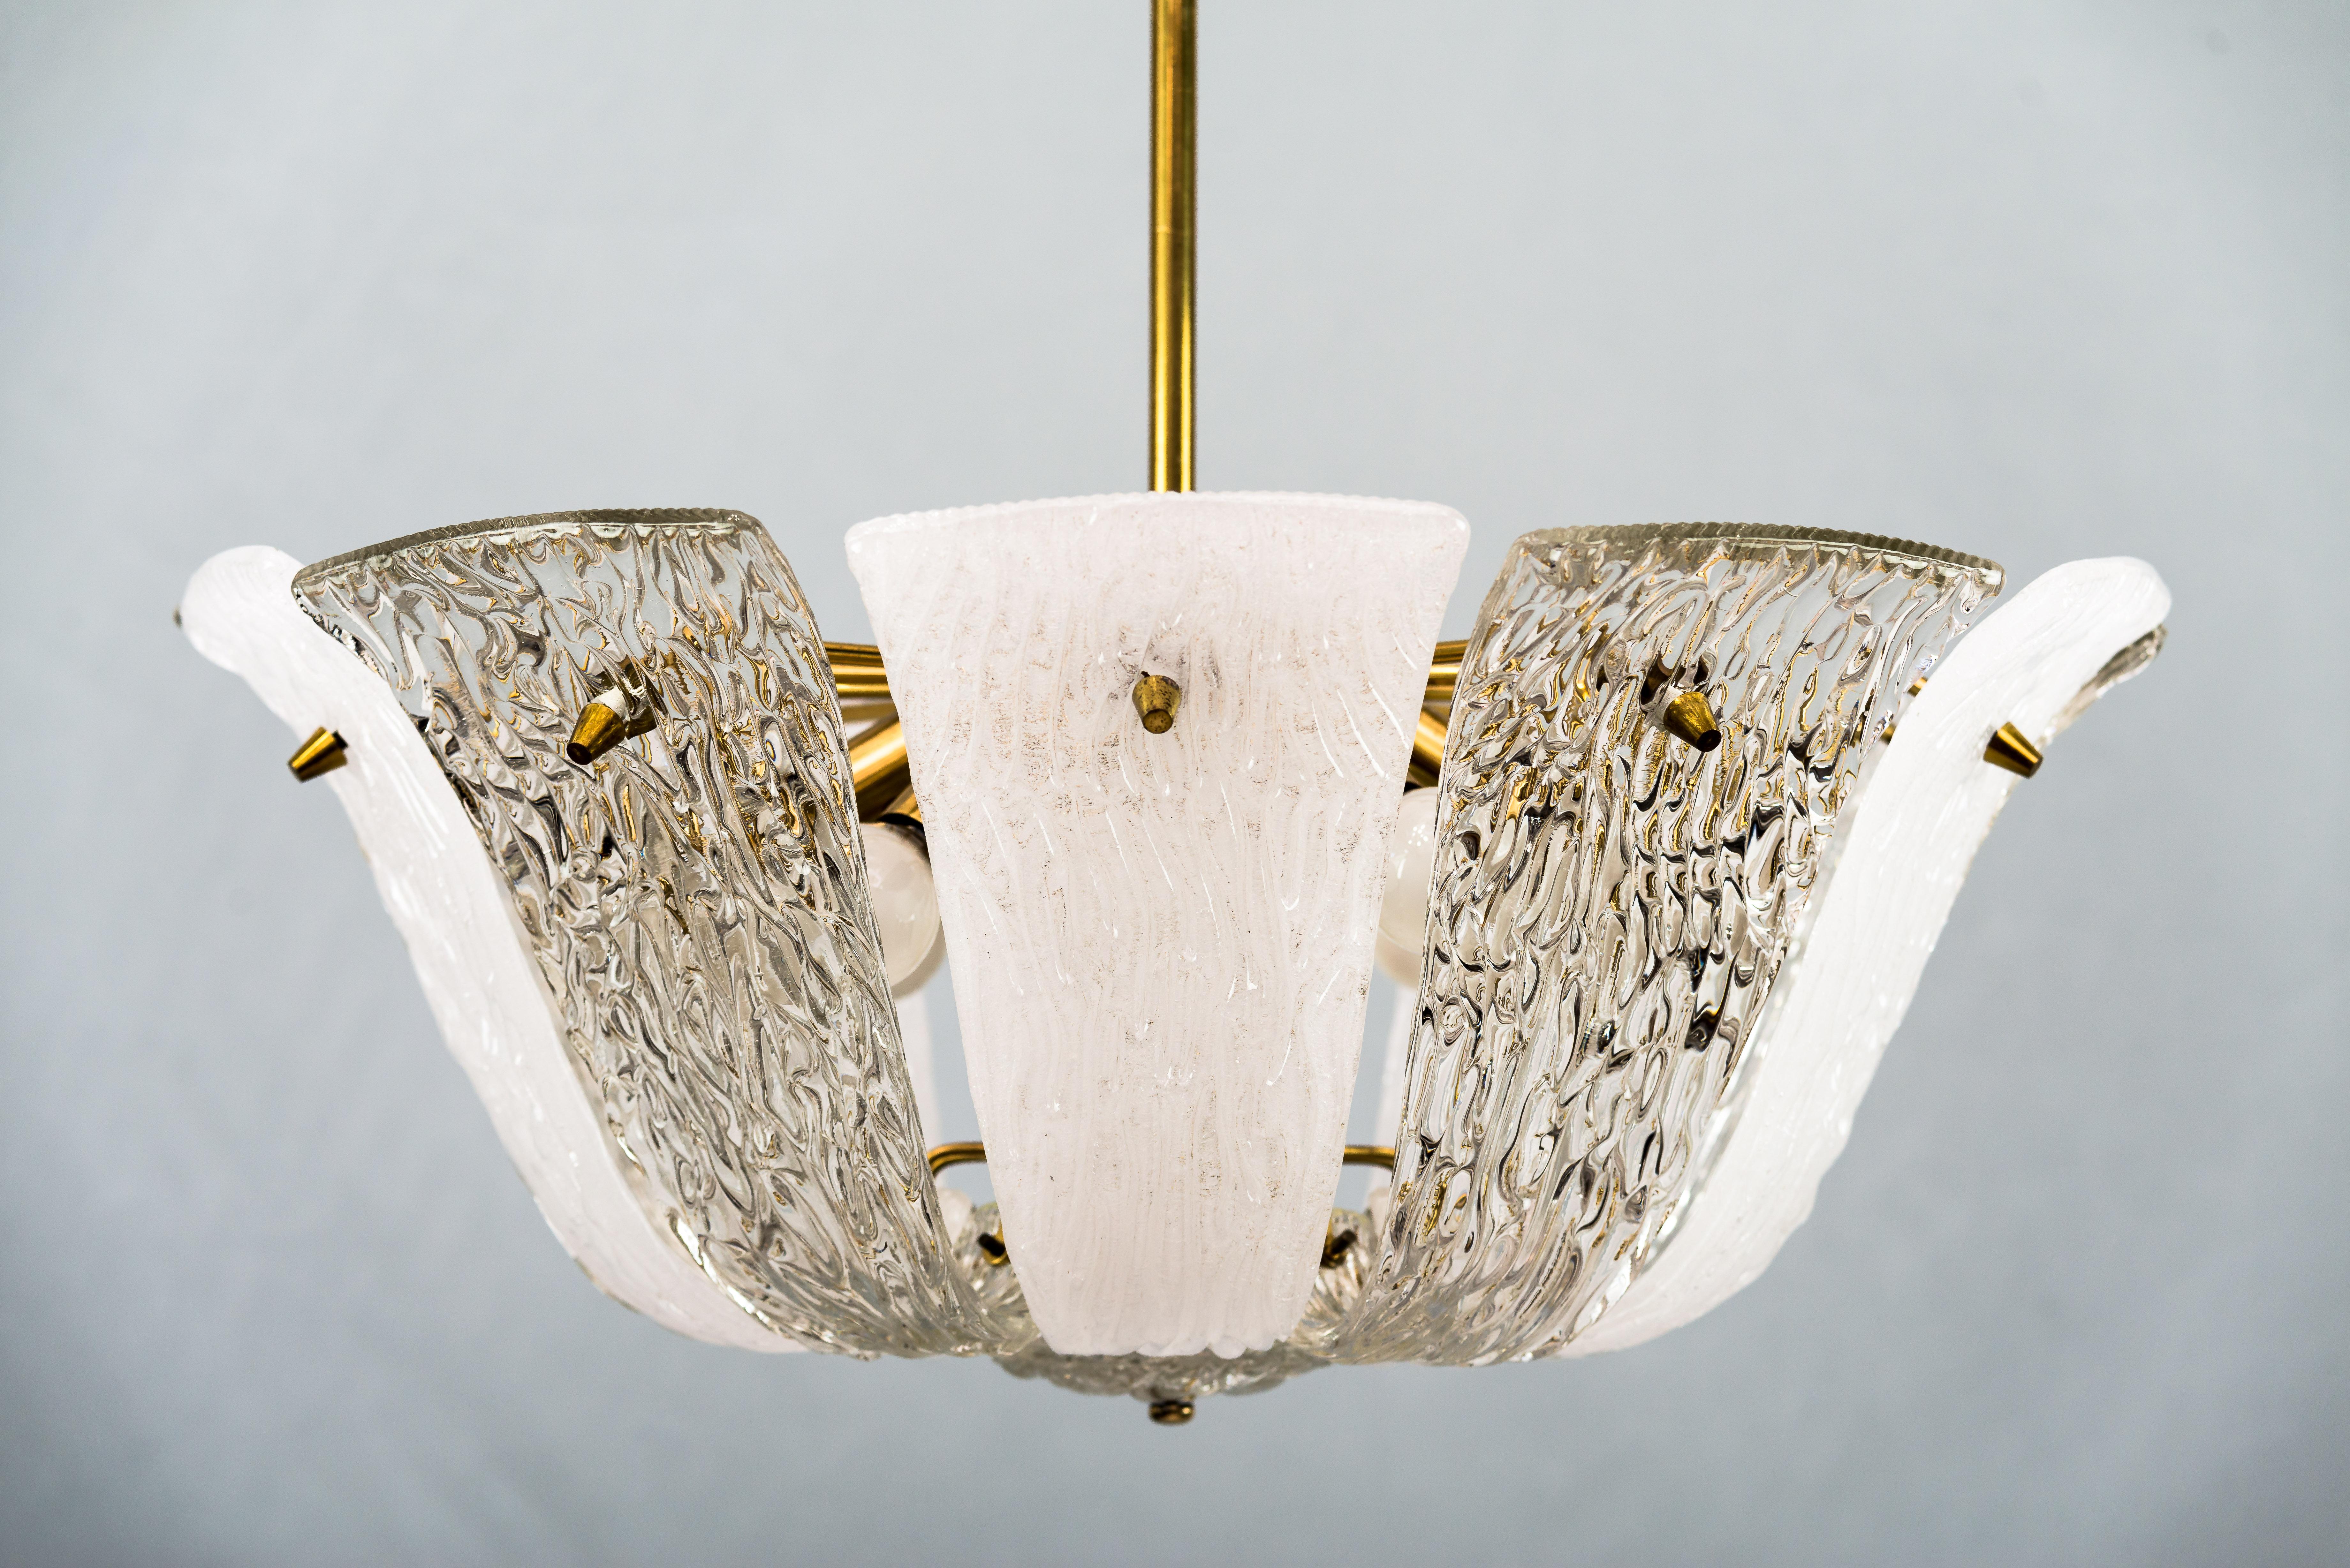 Austrian Brass and Textured Glass and Frosted Glass Chandelier by Kalmar, 1950s For Sale